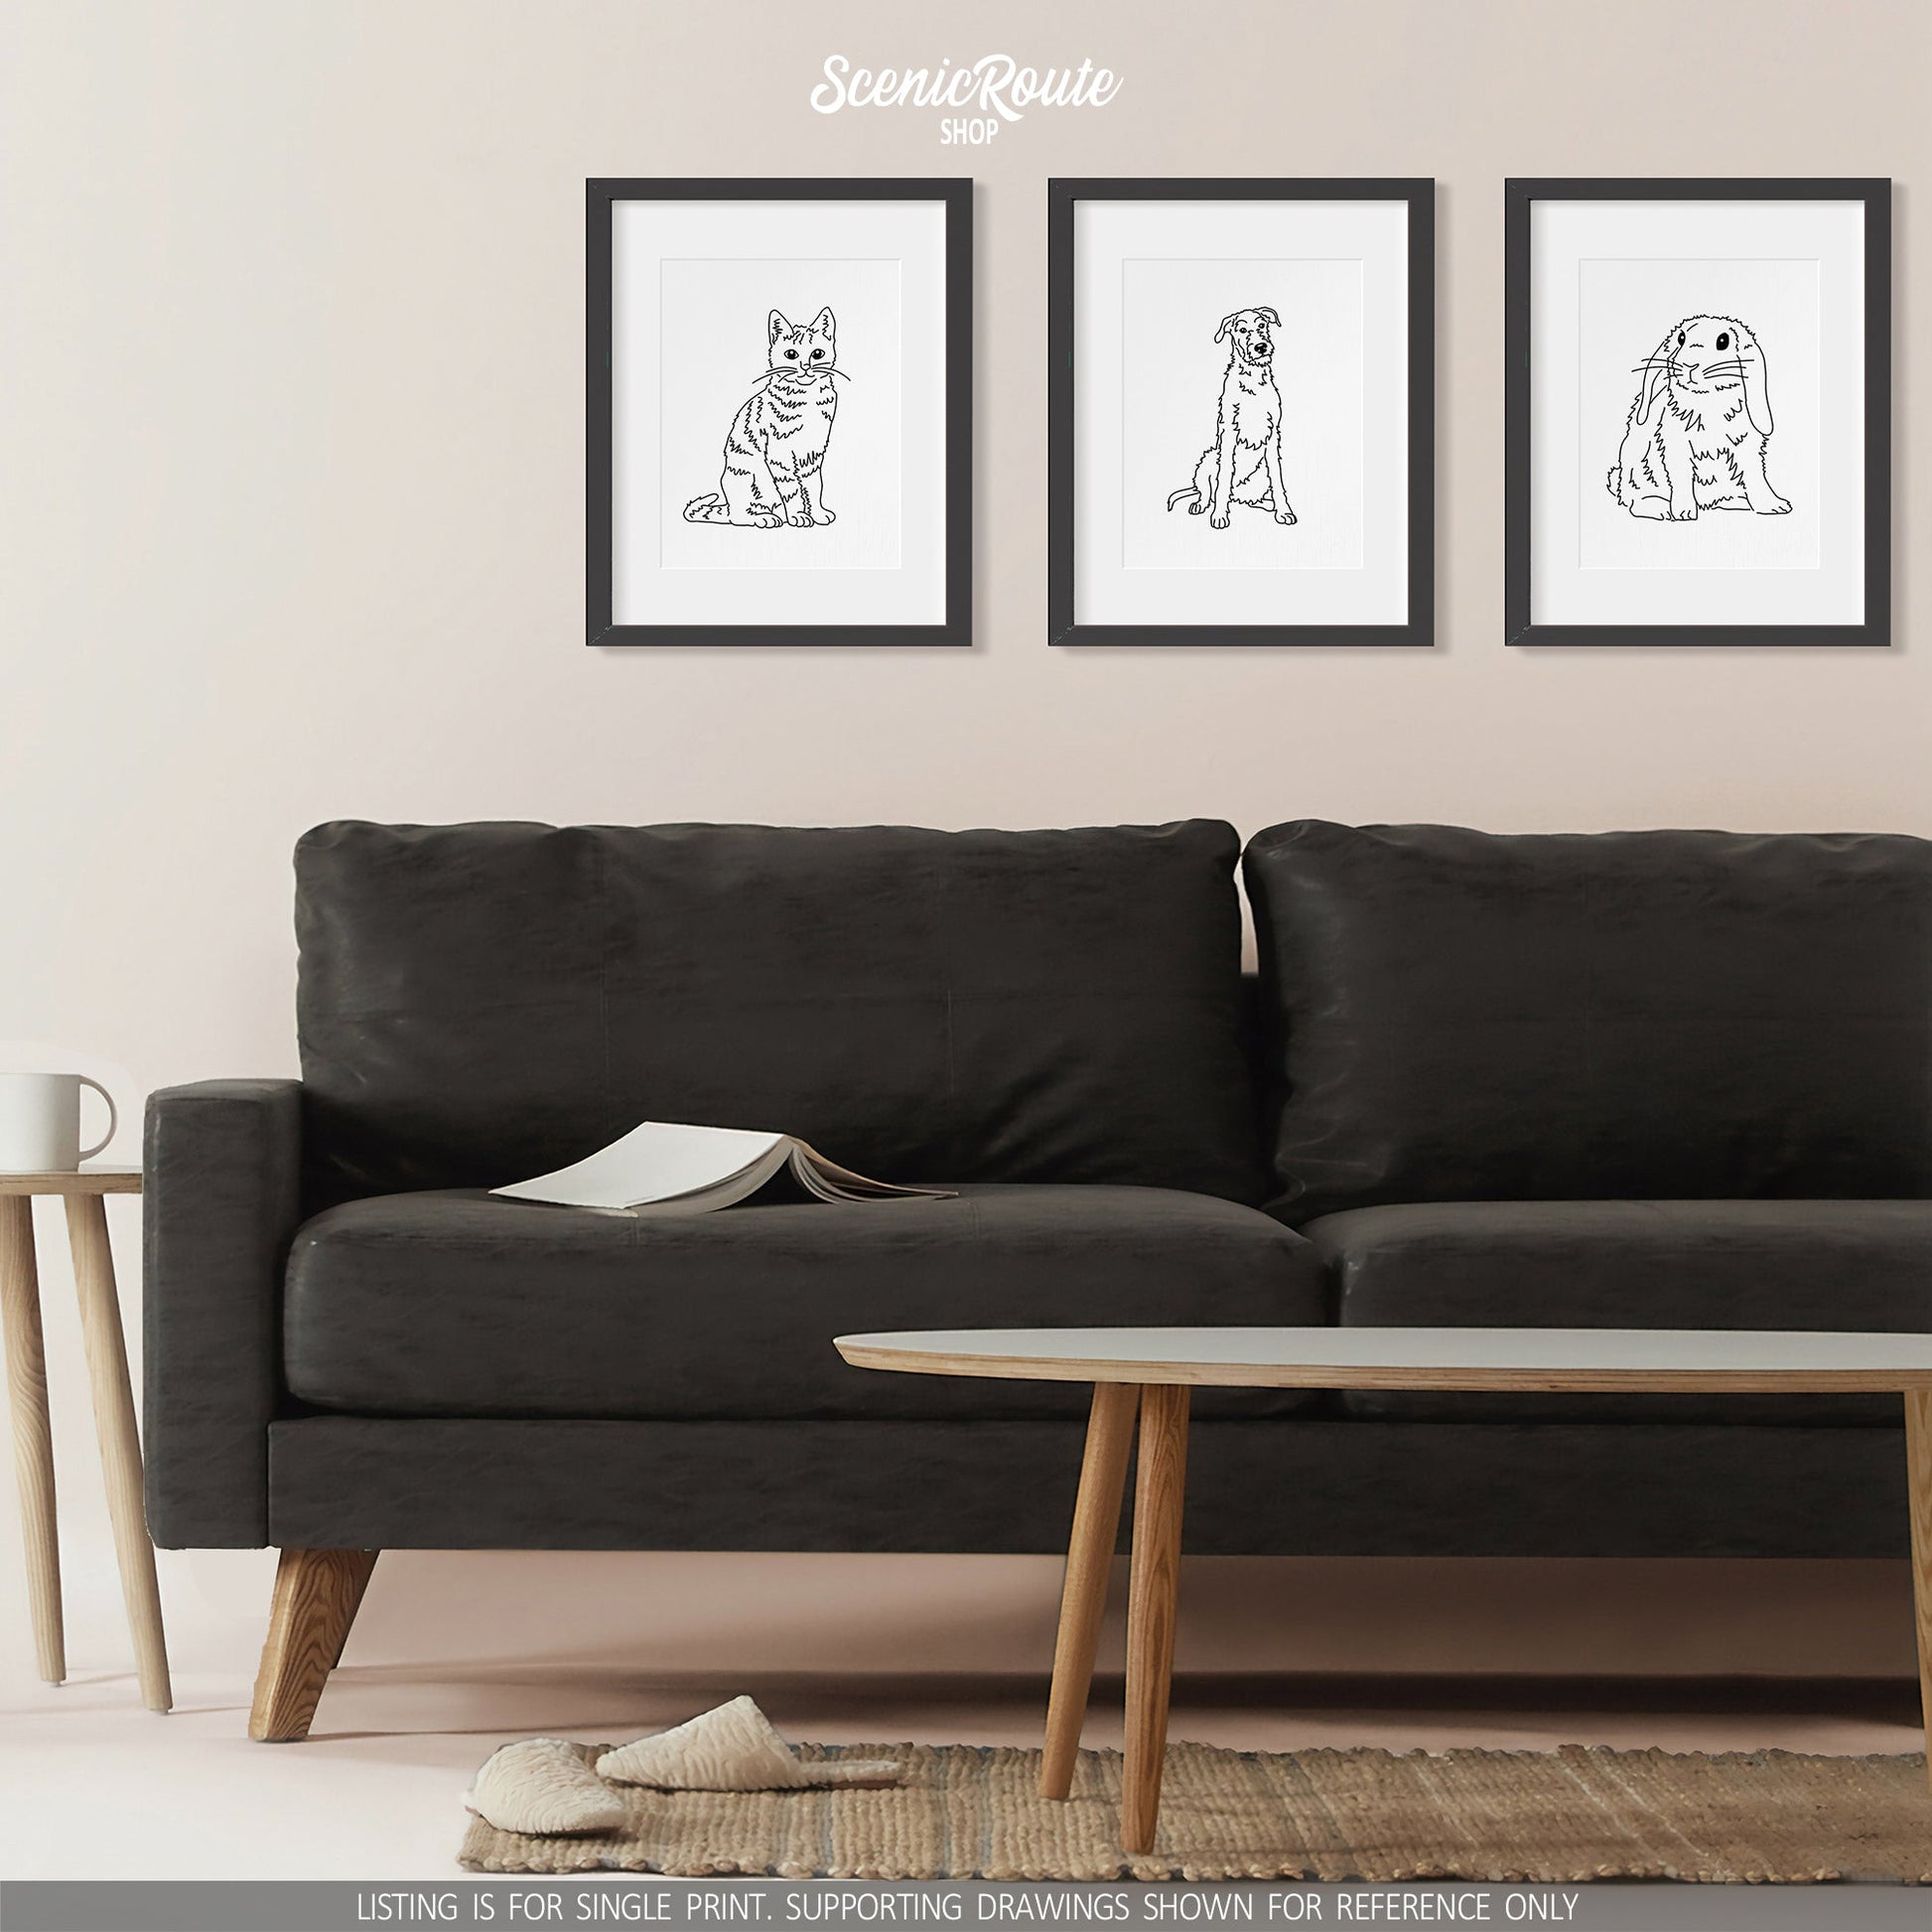 A group of three framed drawings on a white wall above a couch. The line art drawings include a Tabby cat, a Wolfhound dog, and a Mini Lop Rabbit